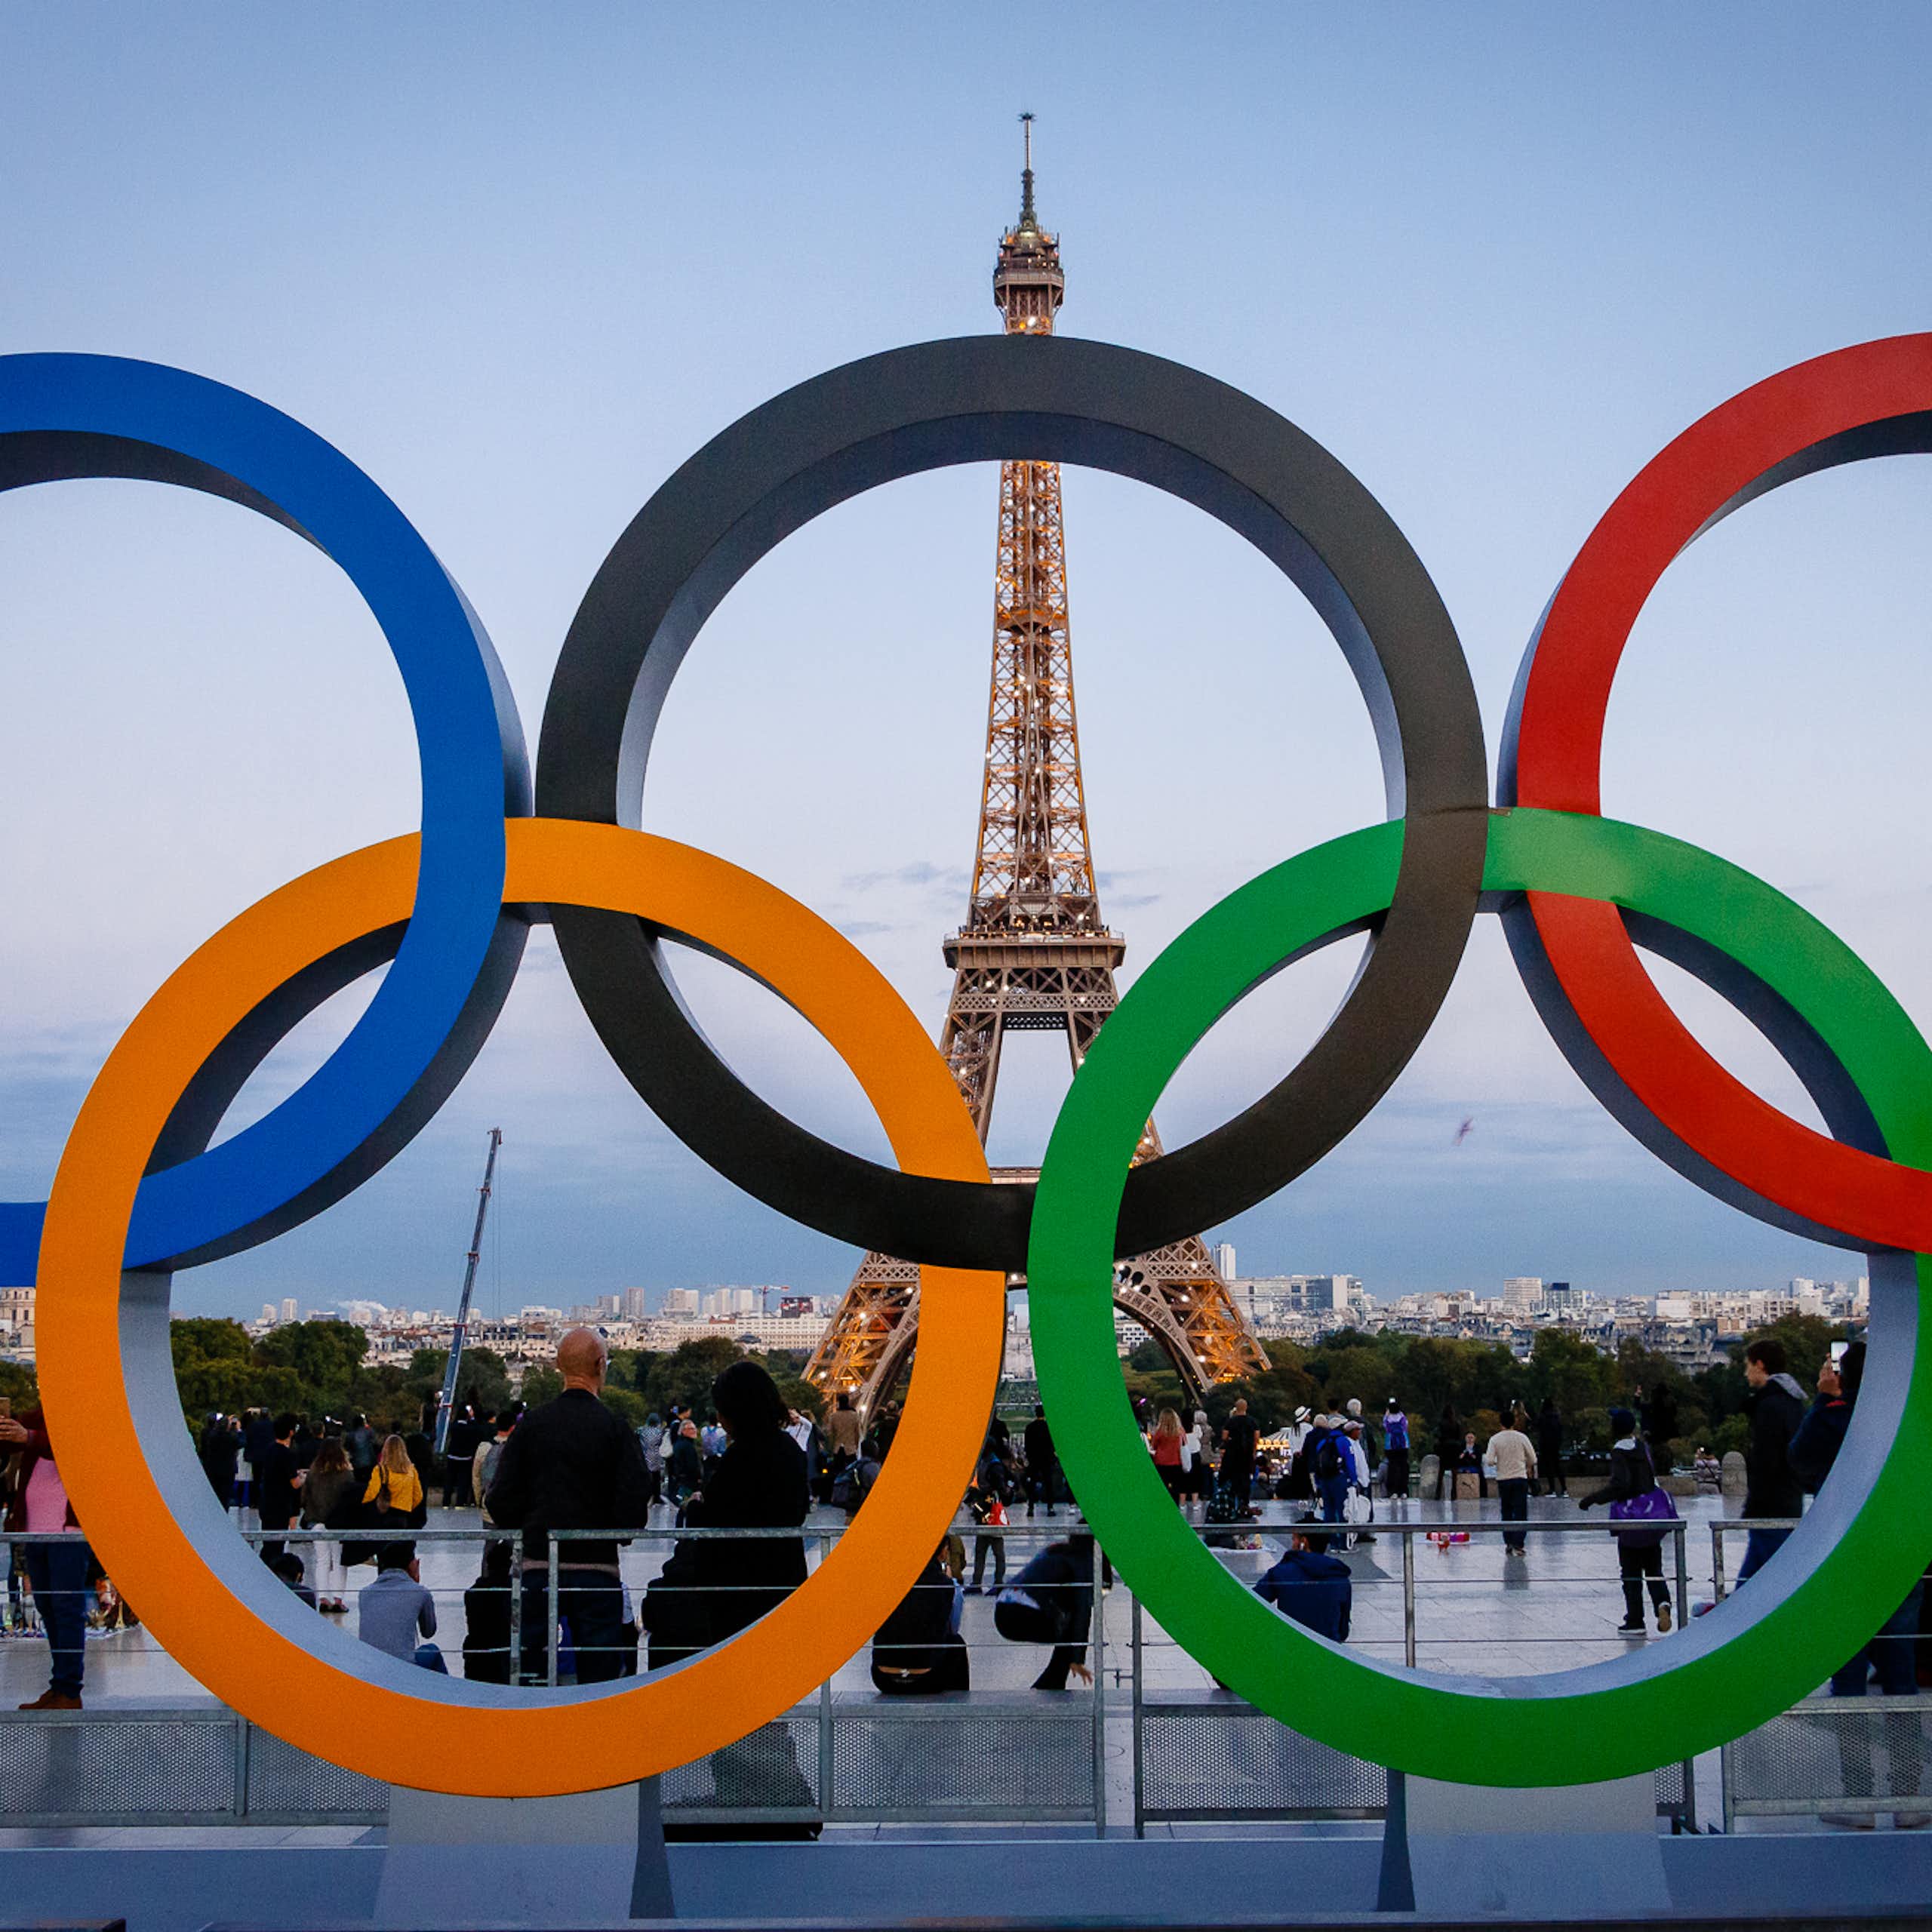 Five Olympic rings with the Eiffel Tower in the background.